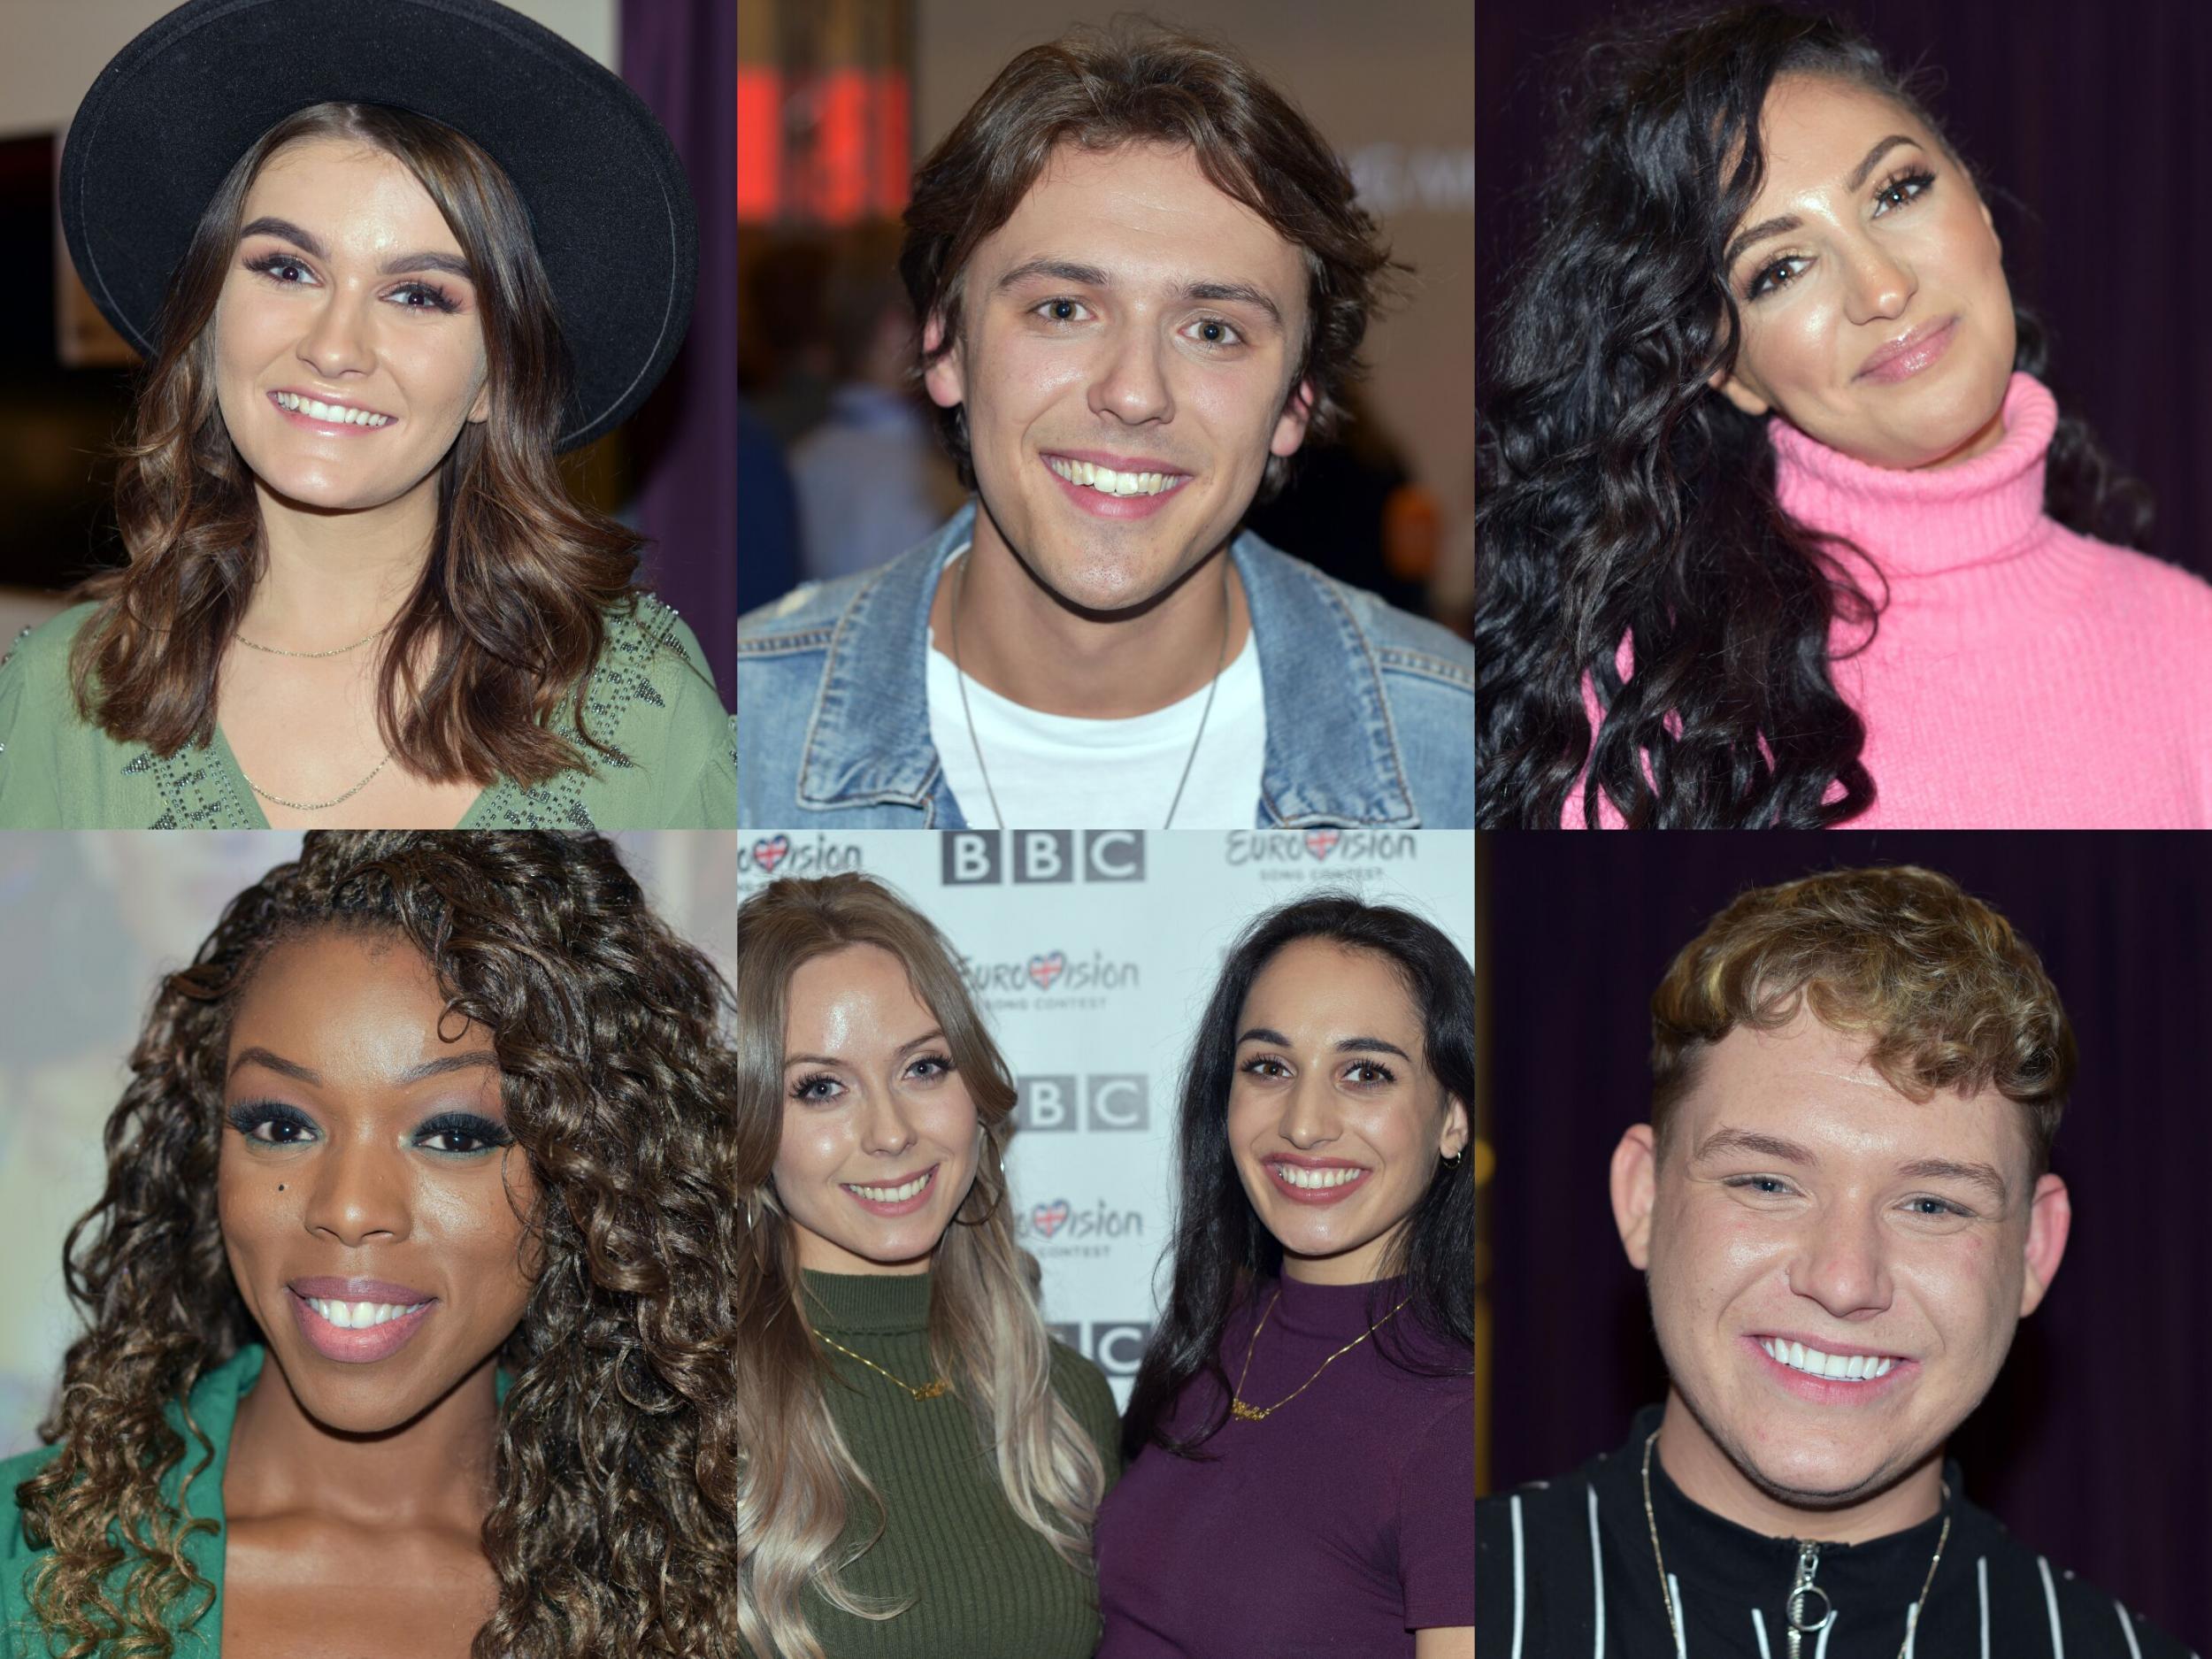 Eurovision contestants, clockwise from top left: Holly Tander, Jordan Clarke, Anisa, Michael Rice, MAID and Kerrie-Ann